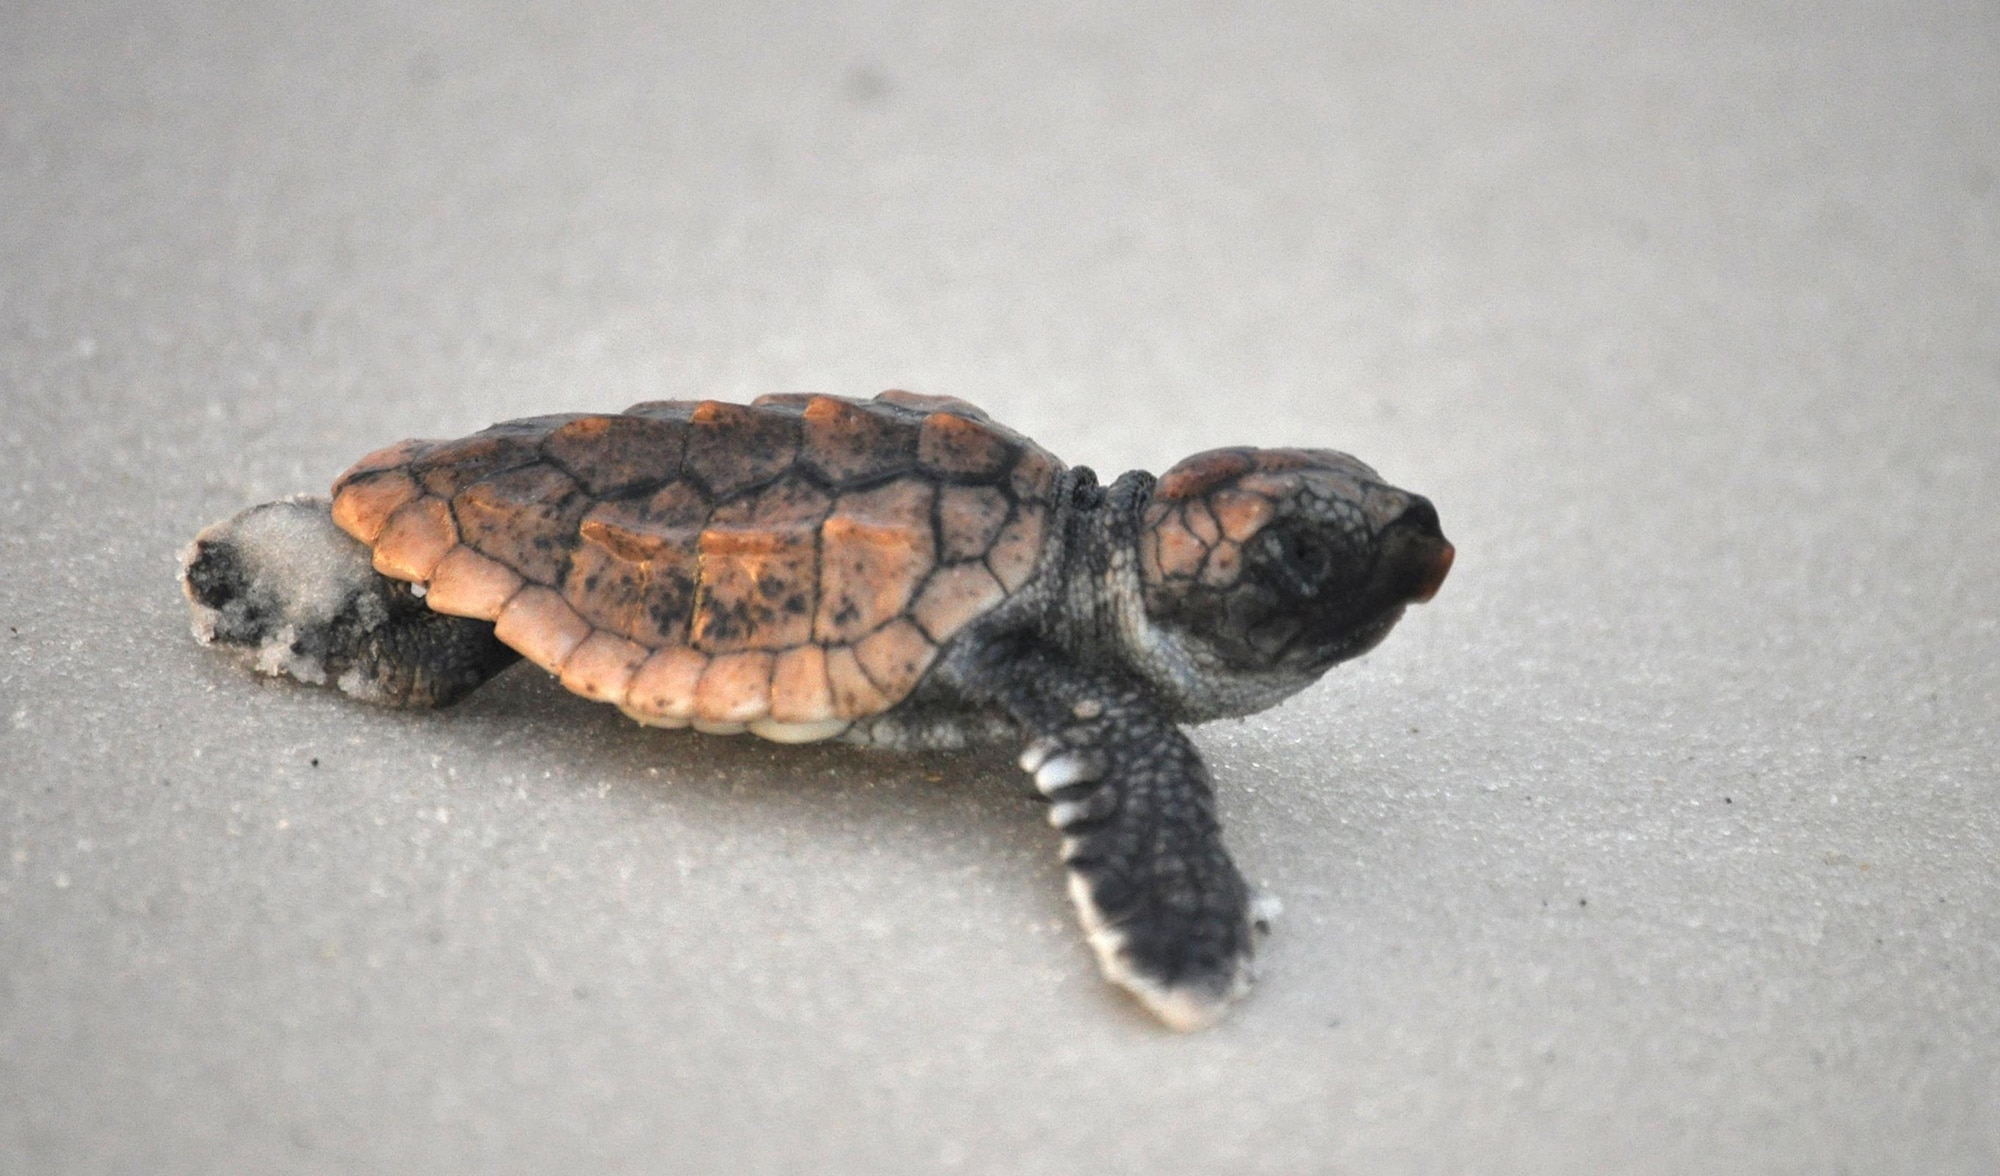 A newly-hatched loggerhead sea turtle crawls to the water after being released by 325th Civil Engineering Squadron Natural Resources surveyors Aug. 23, 2013 at Tyndall Air Force Base, Fla.. Natural Resources monitors and protects the sea turtles that come to Tyndall AFB’s beaches to nest. They also compile data for Florida’s monitoring system on these nests including: where the nests are located, what species of turtles laid the nest and how many successfully hatched out of the nest. 